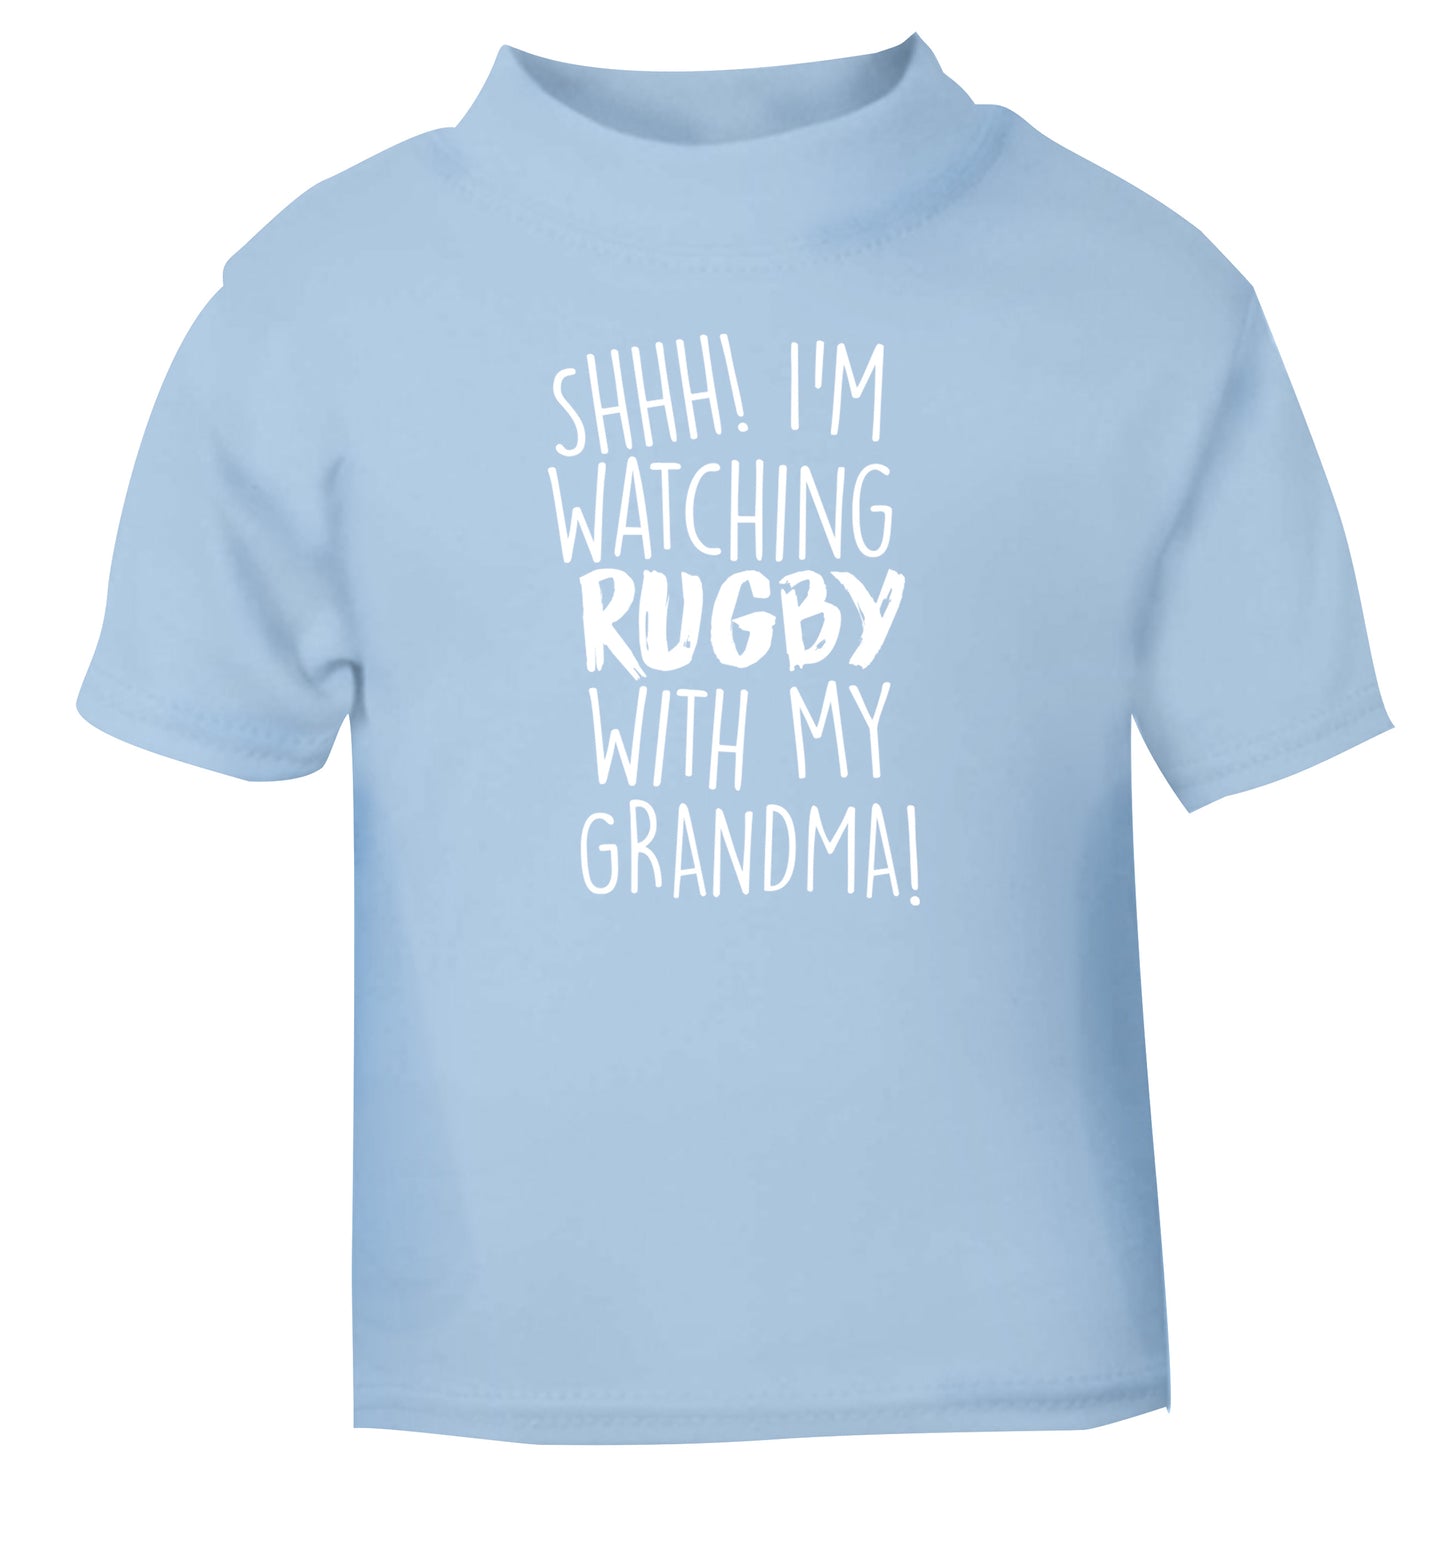 Shh I'm watching rugby with my grandma light blue Baby Toddler Tshirt 2 Years